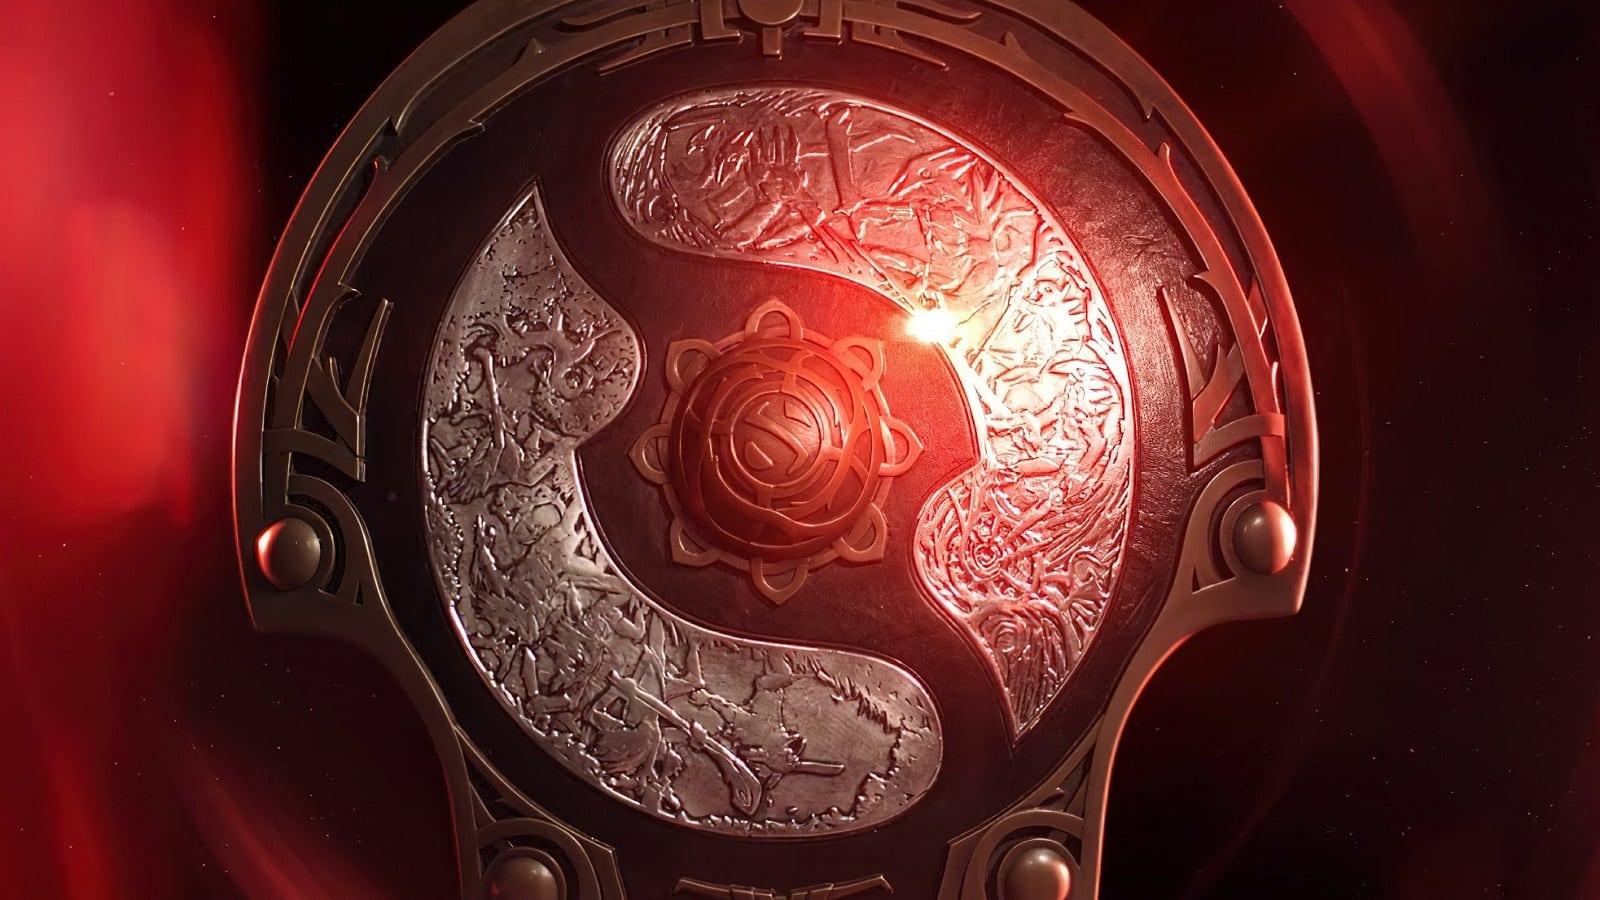 cover art for the trophy of TI11 Dota 2 championship.